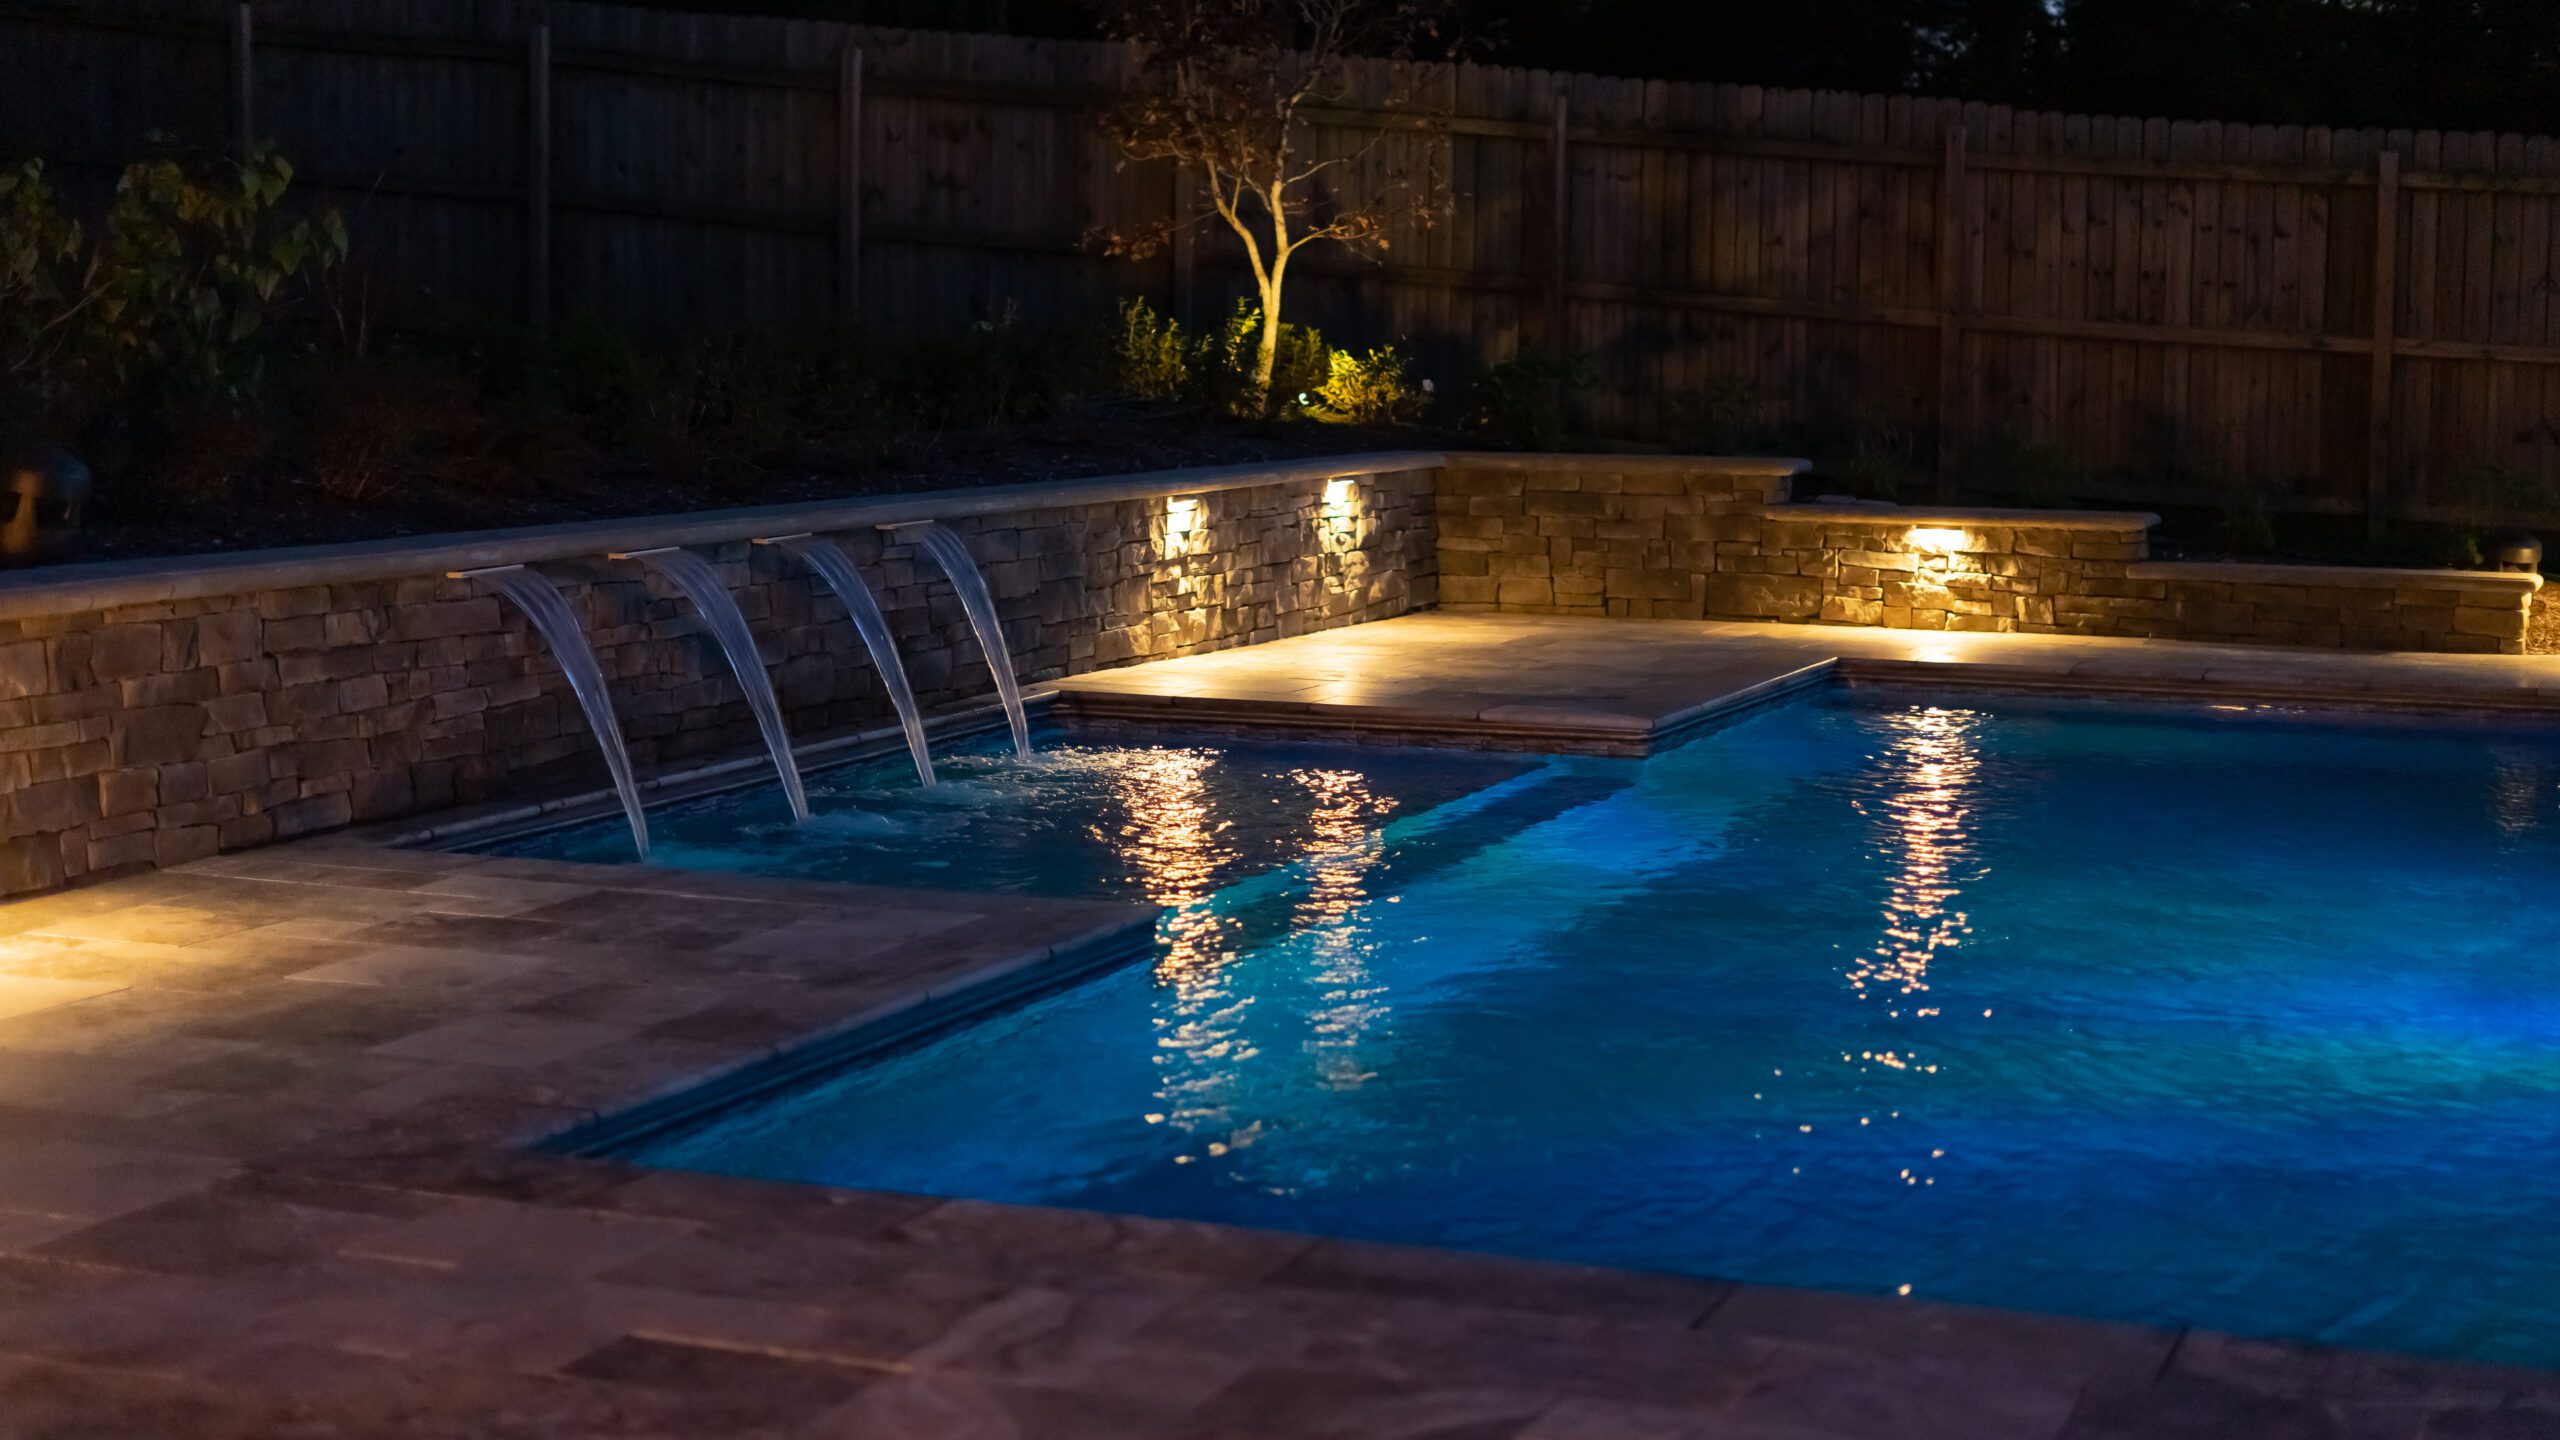 Pool design services from Nashville general contractors